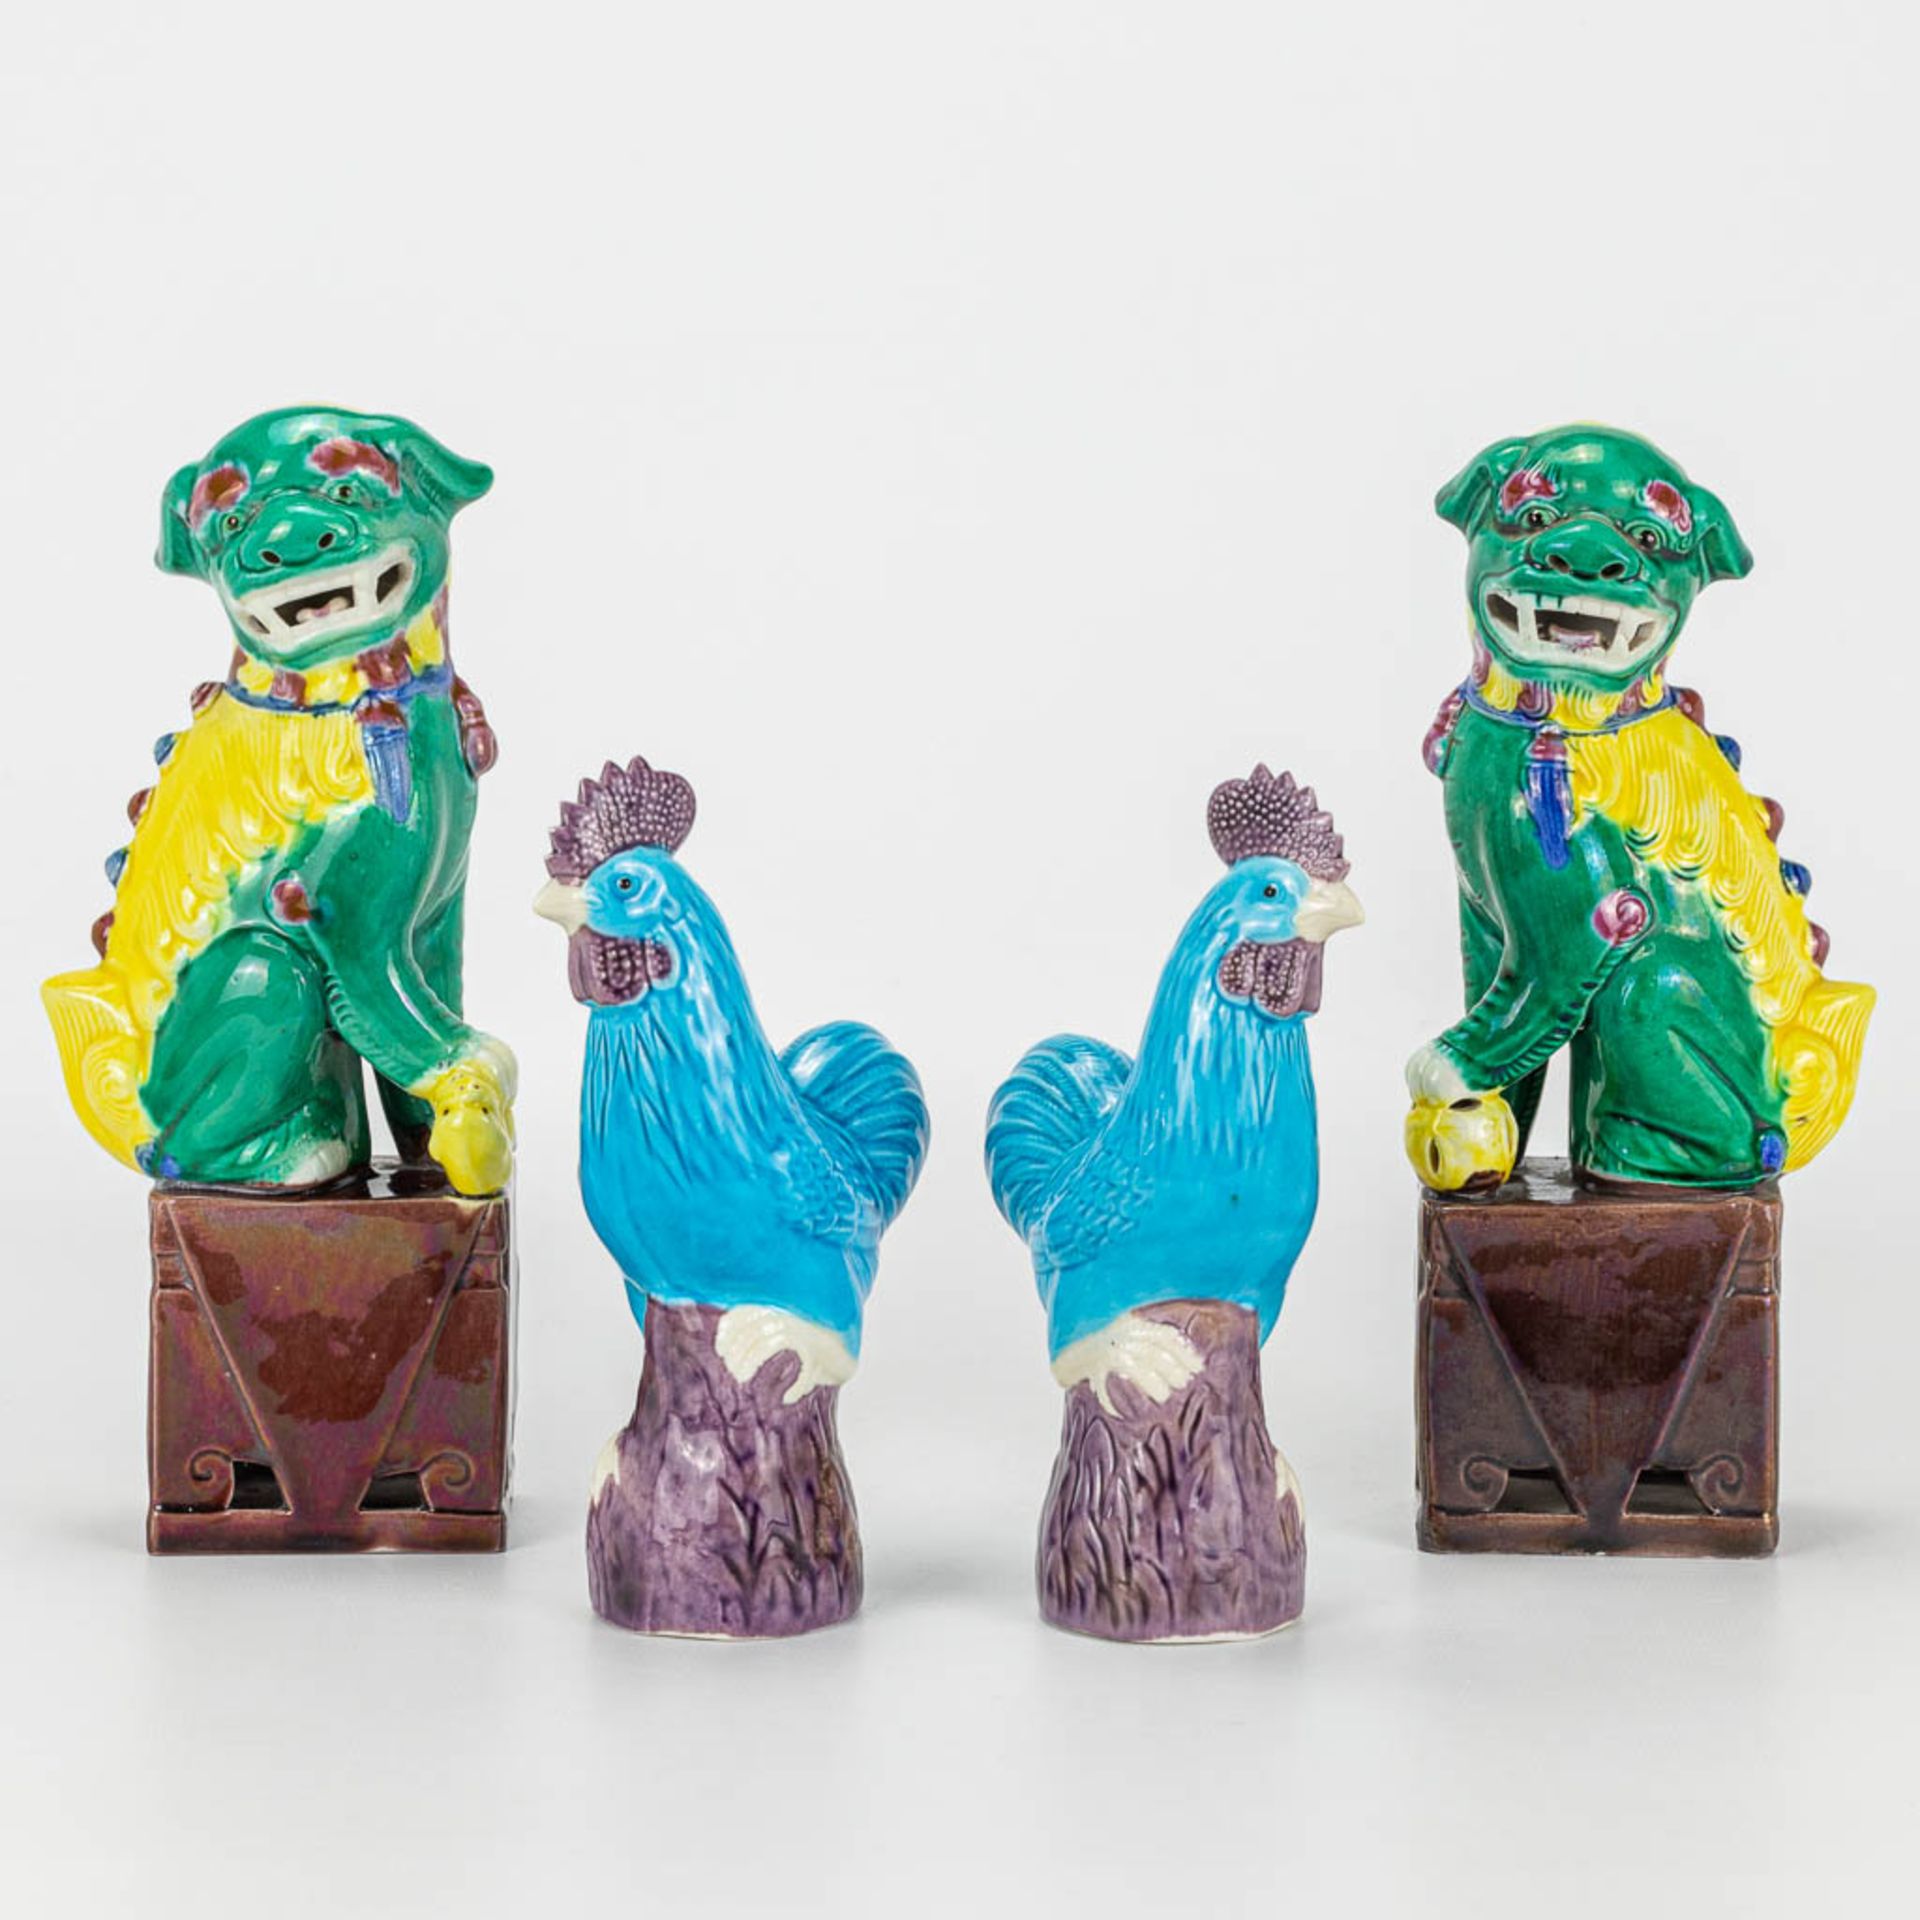 A pair of Foo dogs and chicken made of Chinese porcelain.